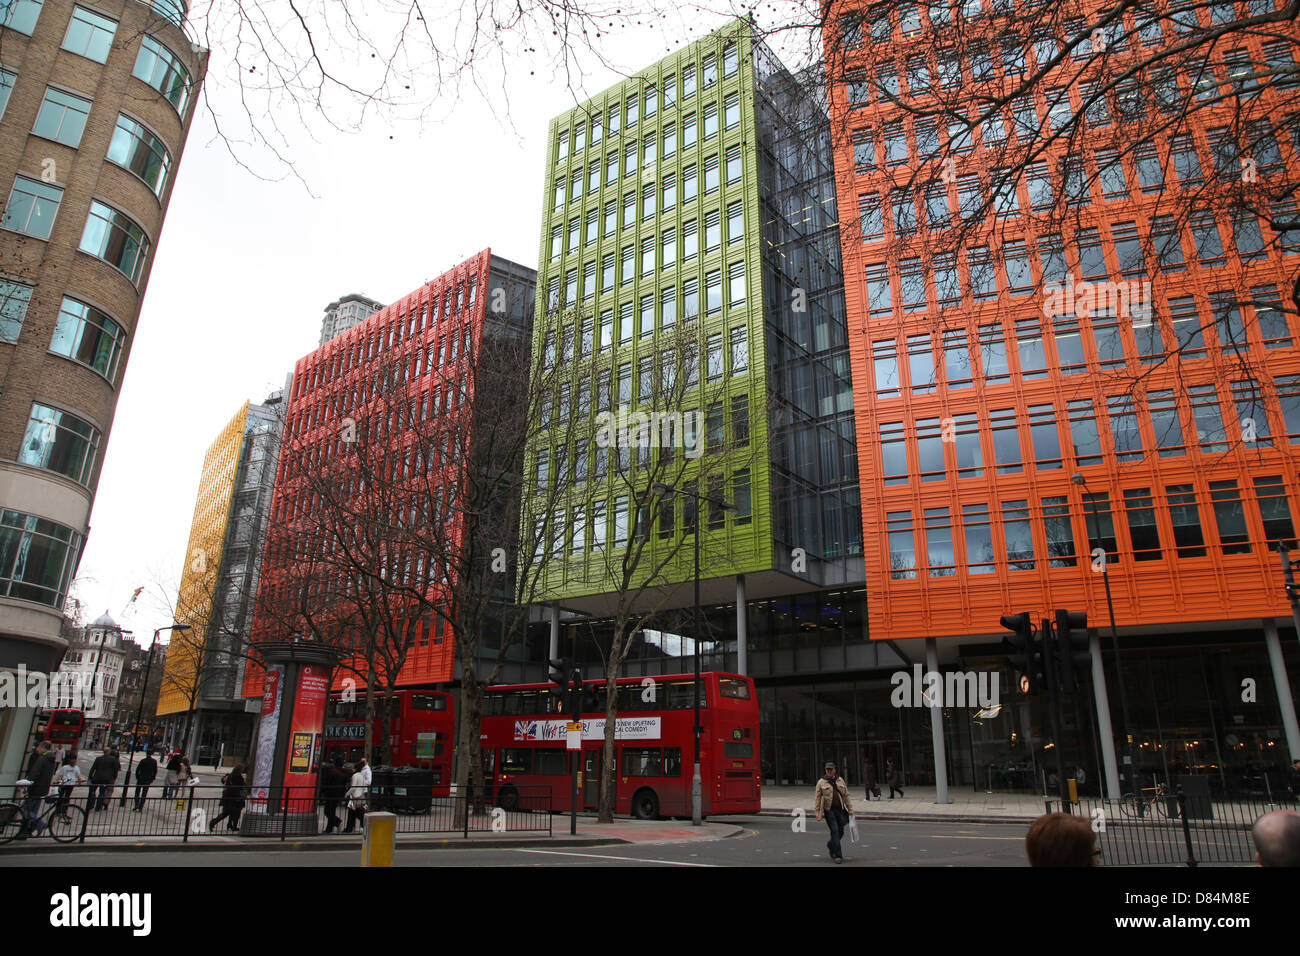 These brightly colored offices are  Central St Giles office development containing the London offices of Google. Stock Photo